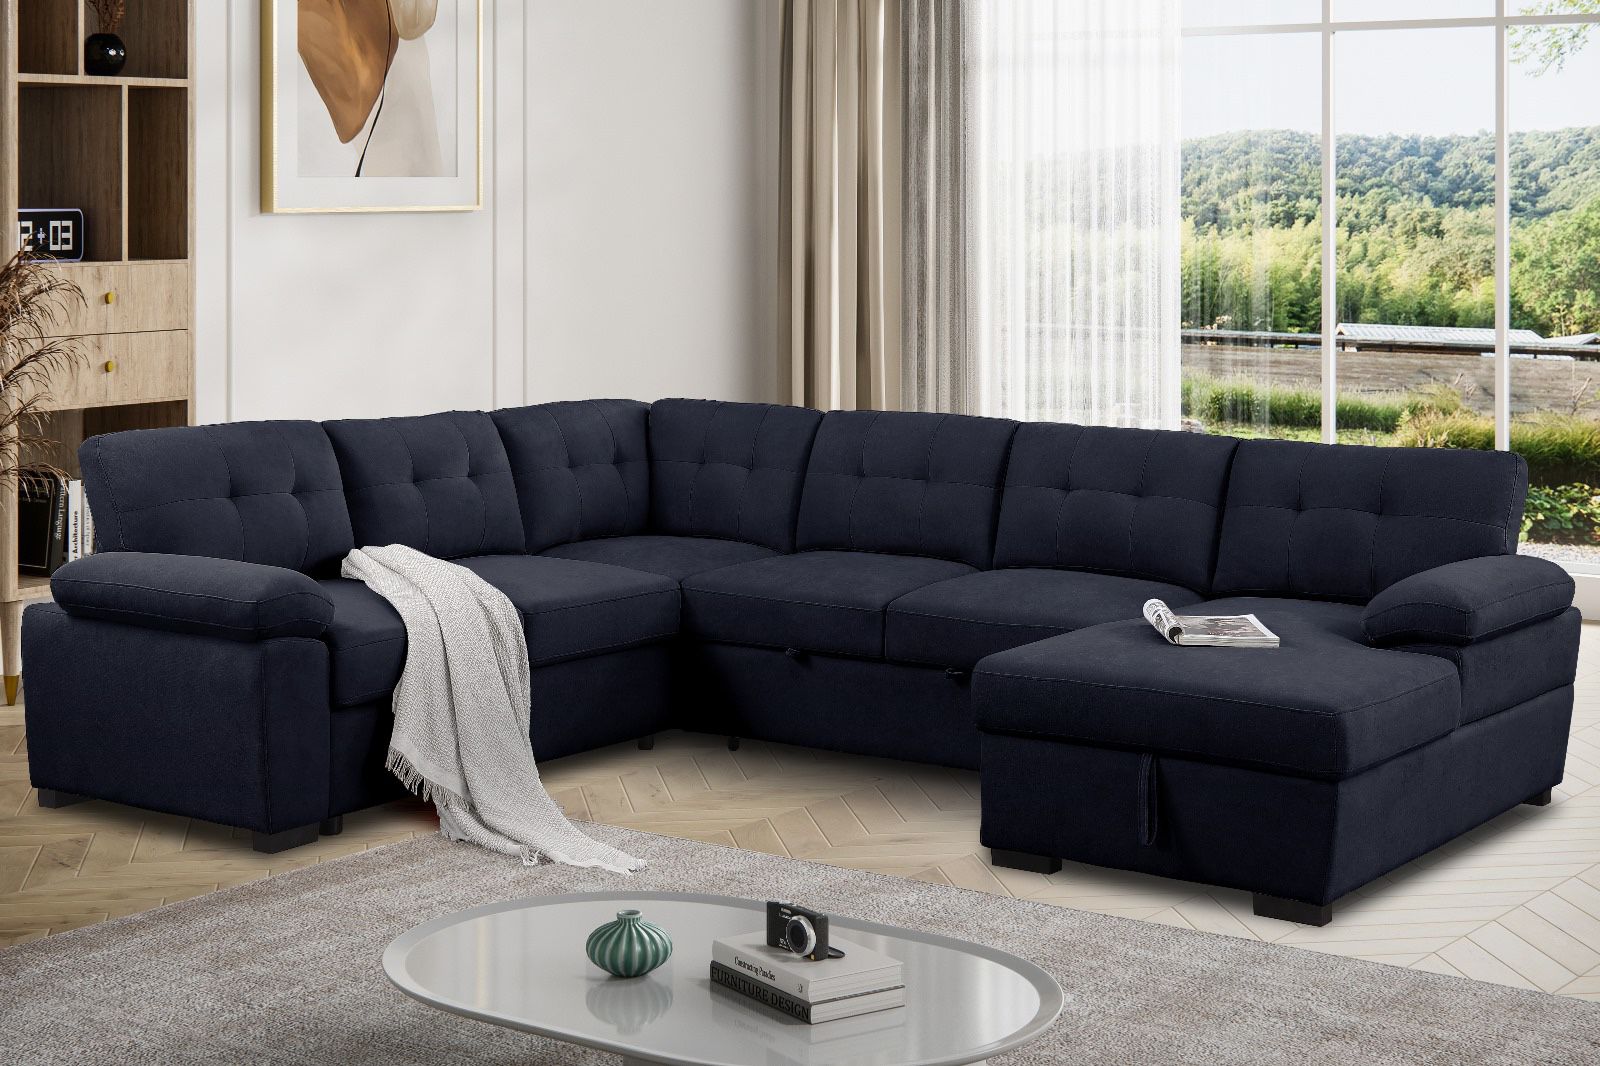 New! Premium Sectional Sofa Bed, Sofa Bed, Sectional Sofa With Pull Out Bed, Large Sectional, Sectionals, Sleeper Sofa Couch